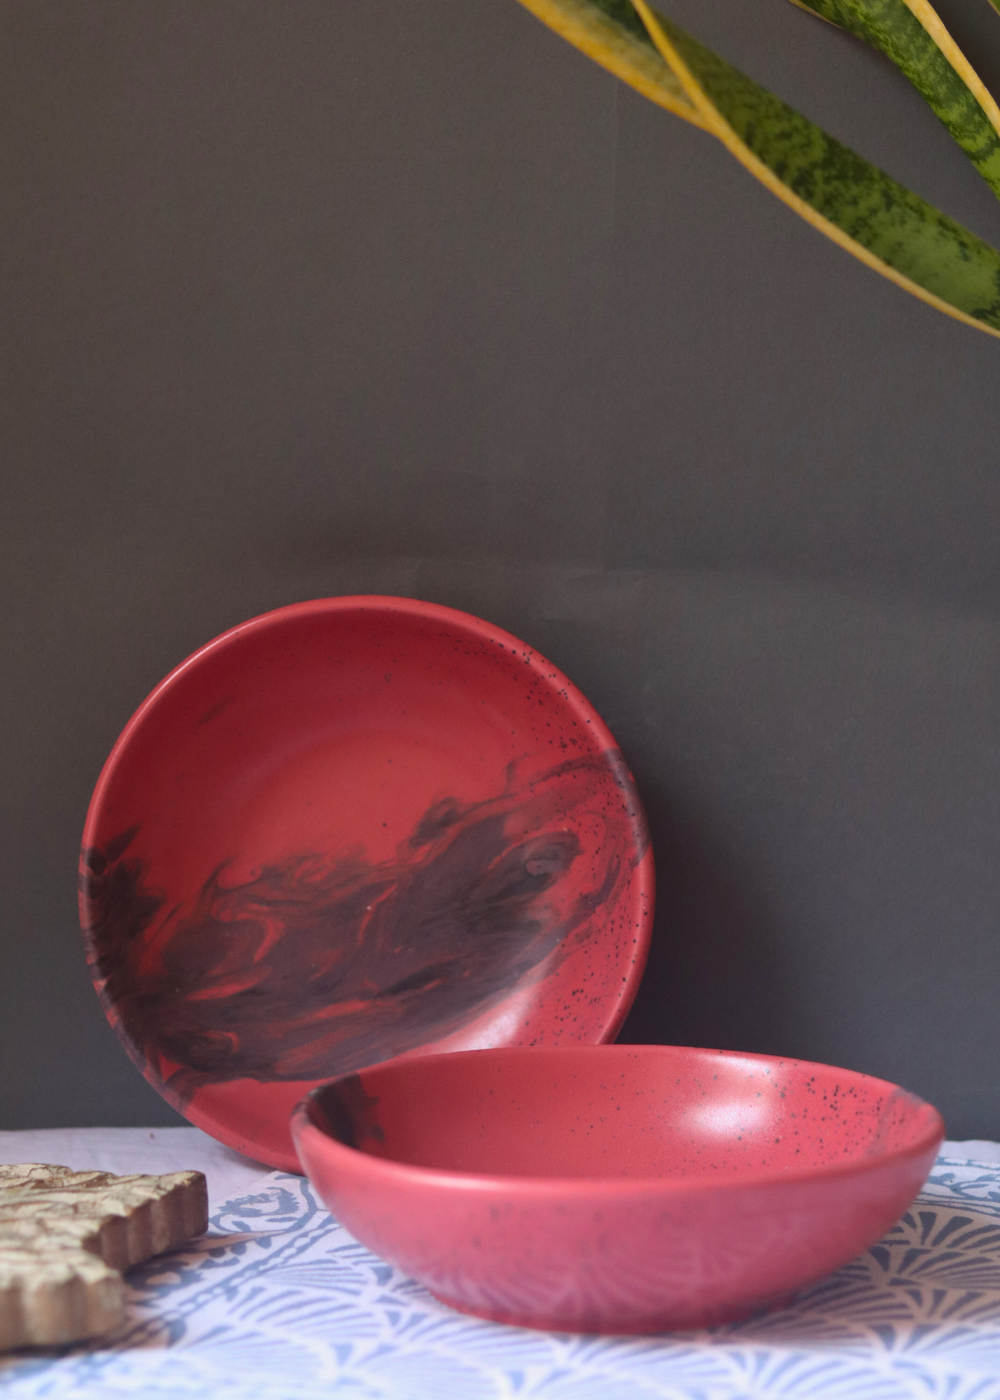 red & black bowl with shade of black color